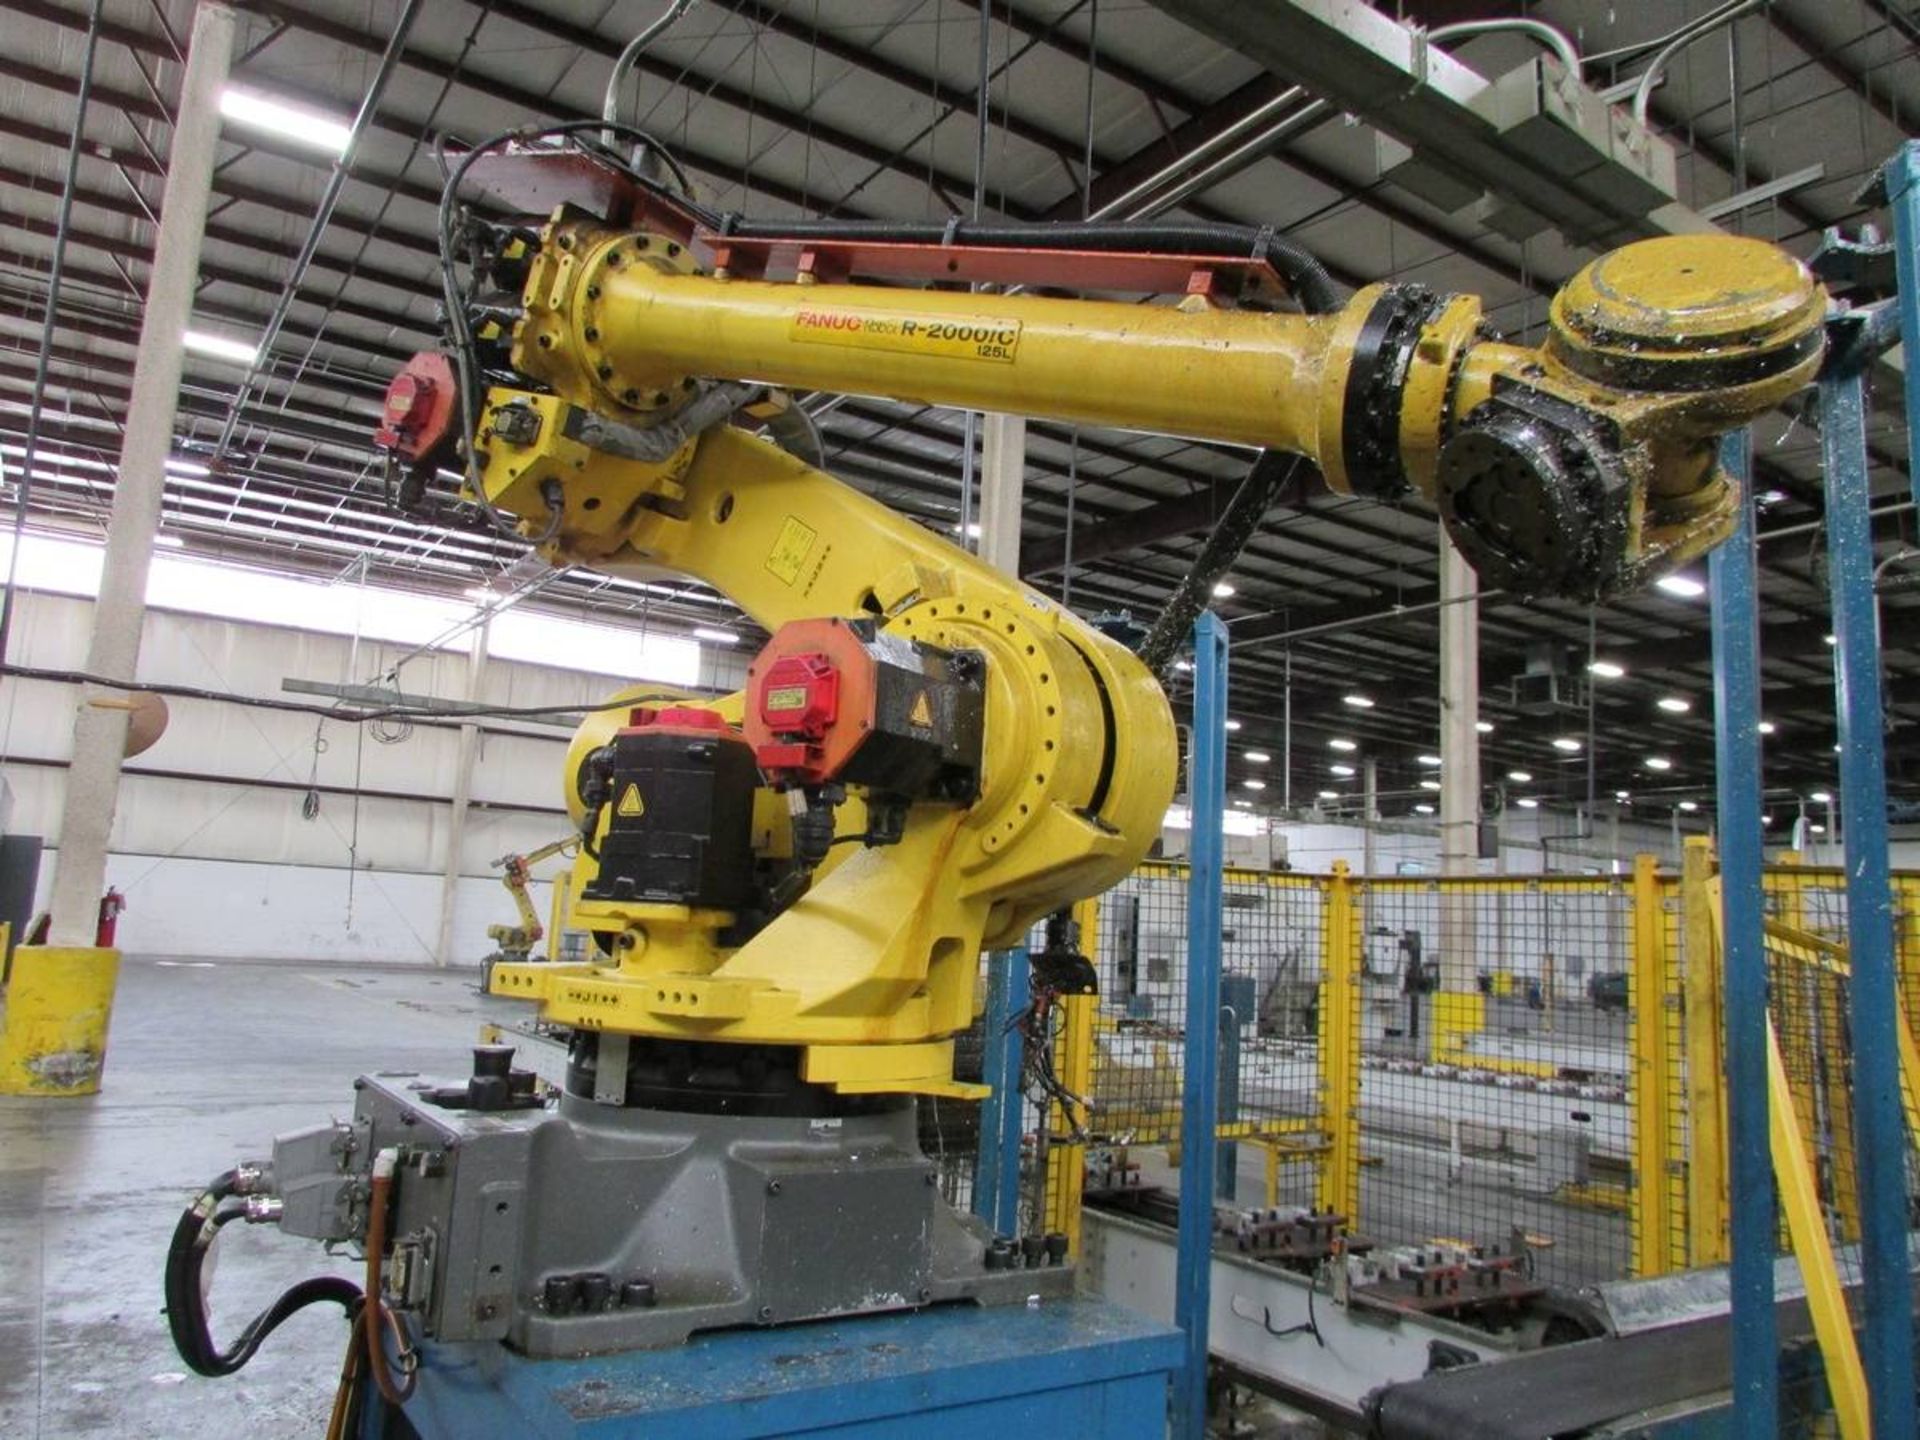 2015 Fanuc R 2000 iC 125L 6 Axis Material Handling Robot - Image 2 of 11